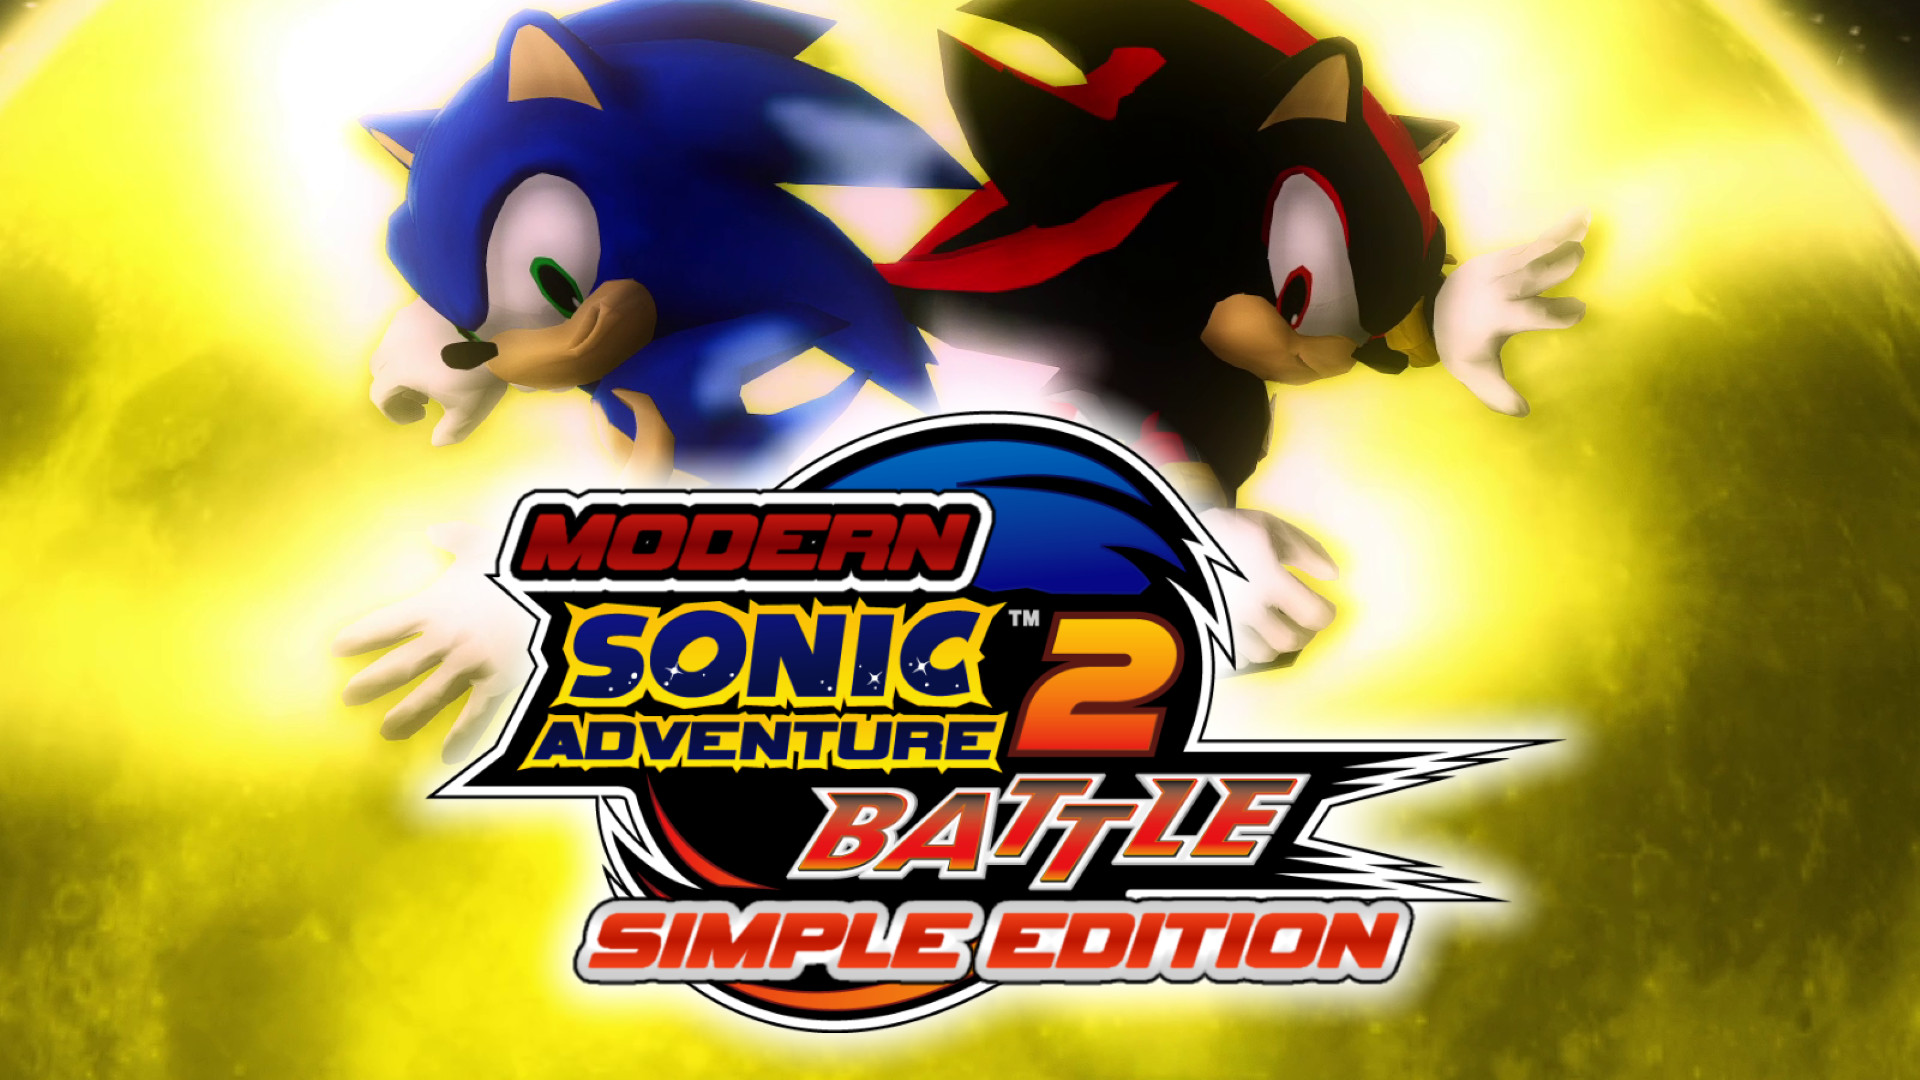 Sonic Upgrades Shadow the Hedgehog with a Disastrous New Power